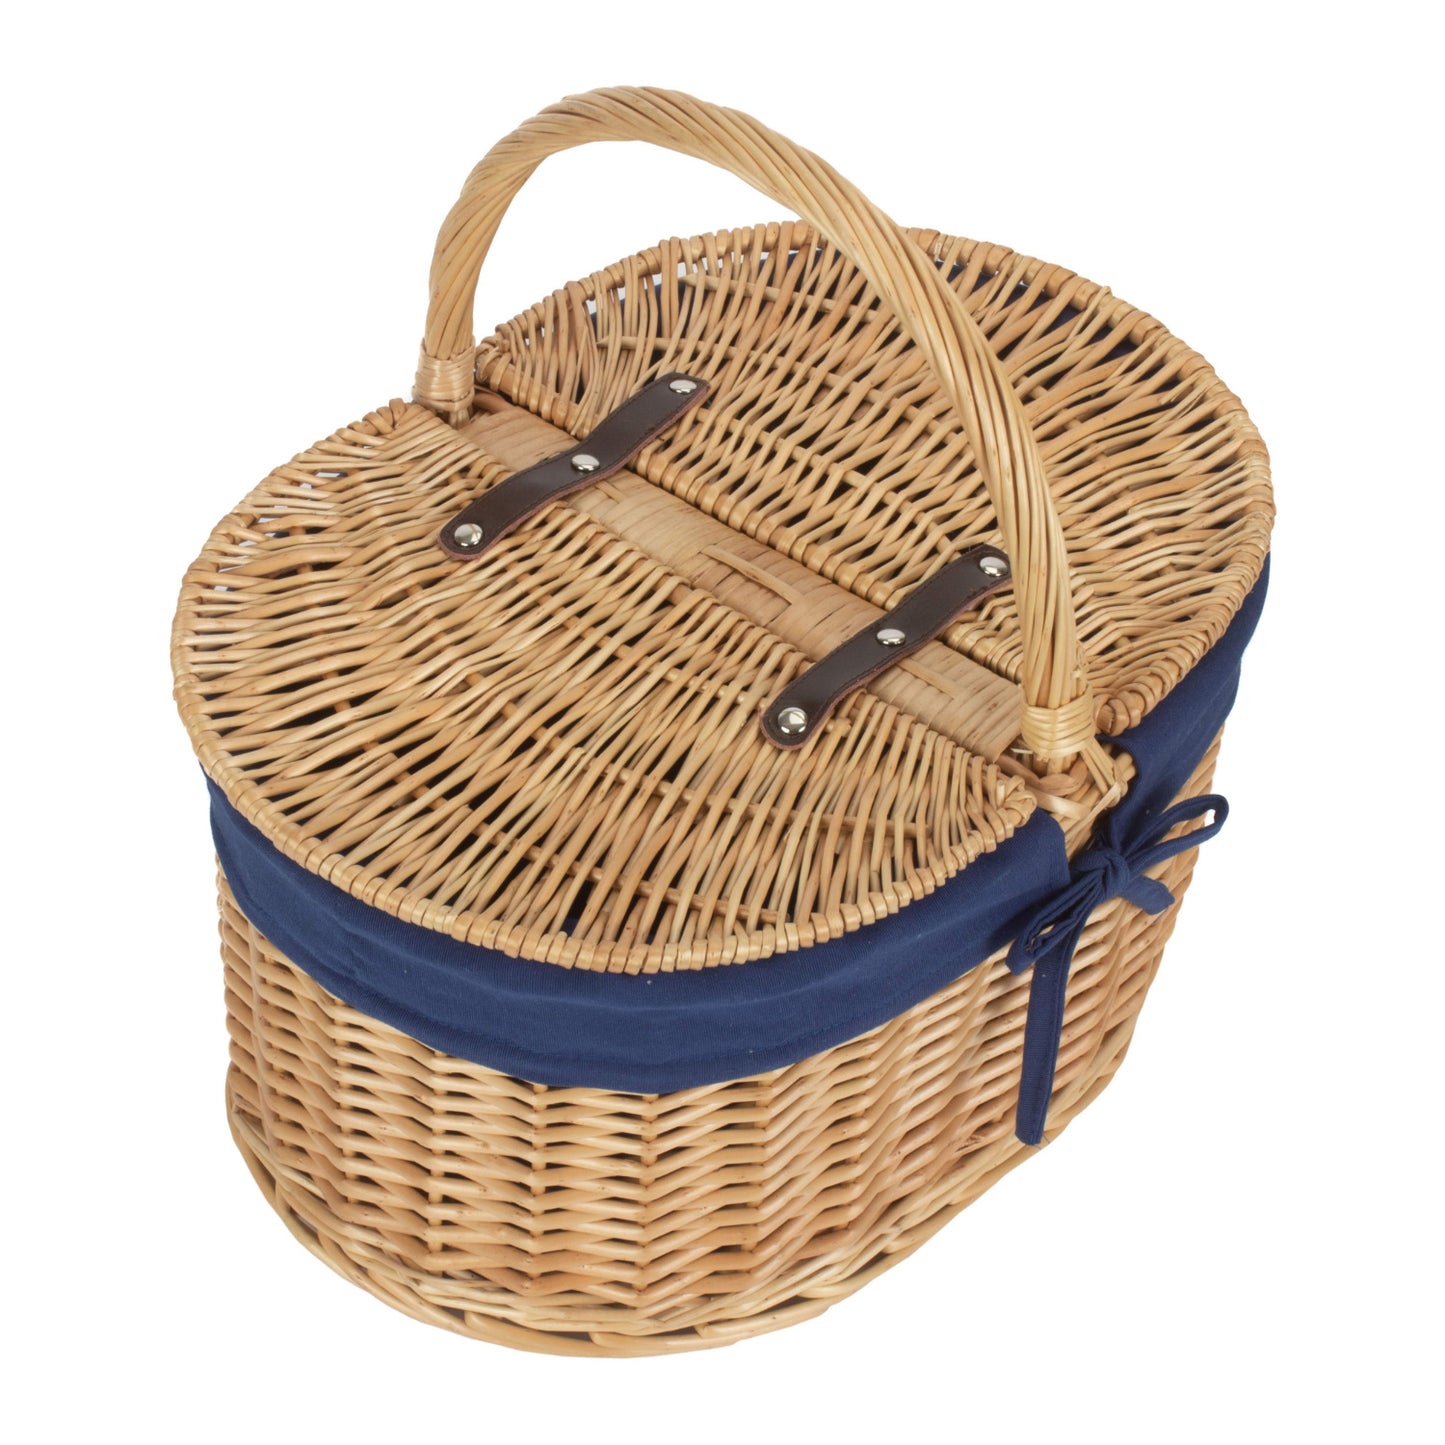 Oval Lidded Hamper With Navy Blue Lining